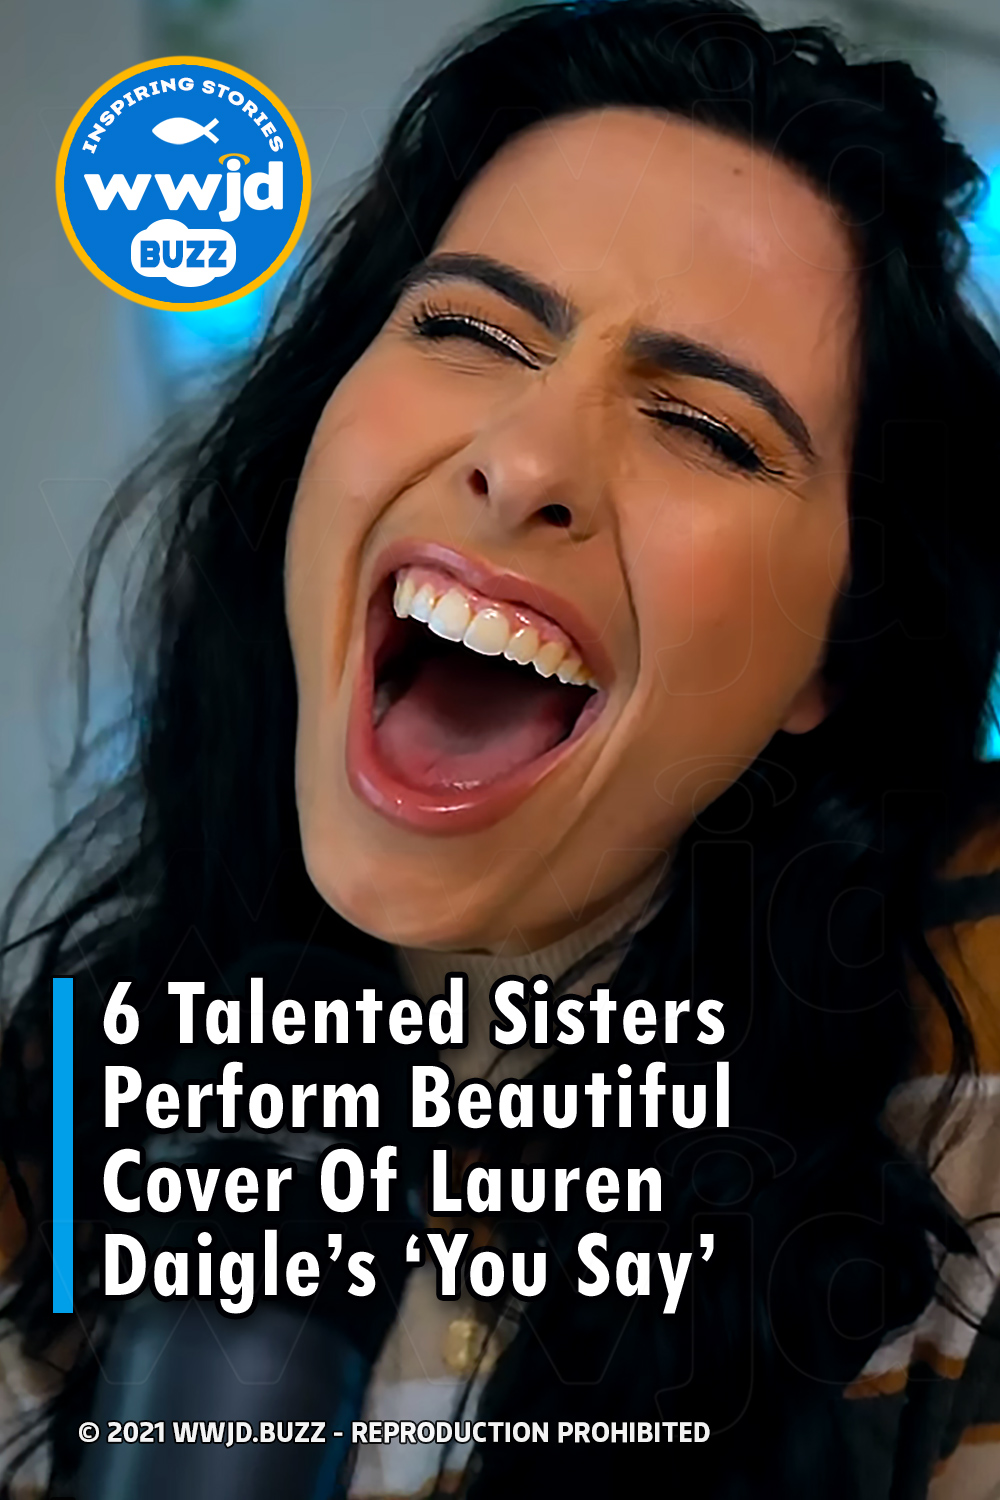 6 Talented Sisters Perform Beautiful Cover Of Lauren Daigle’s \'You Say\'